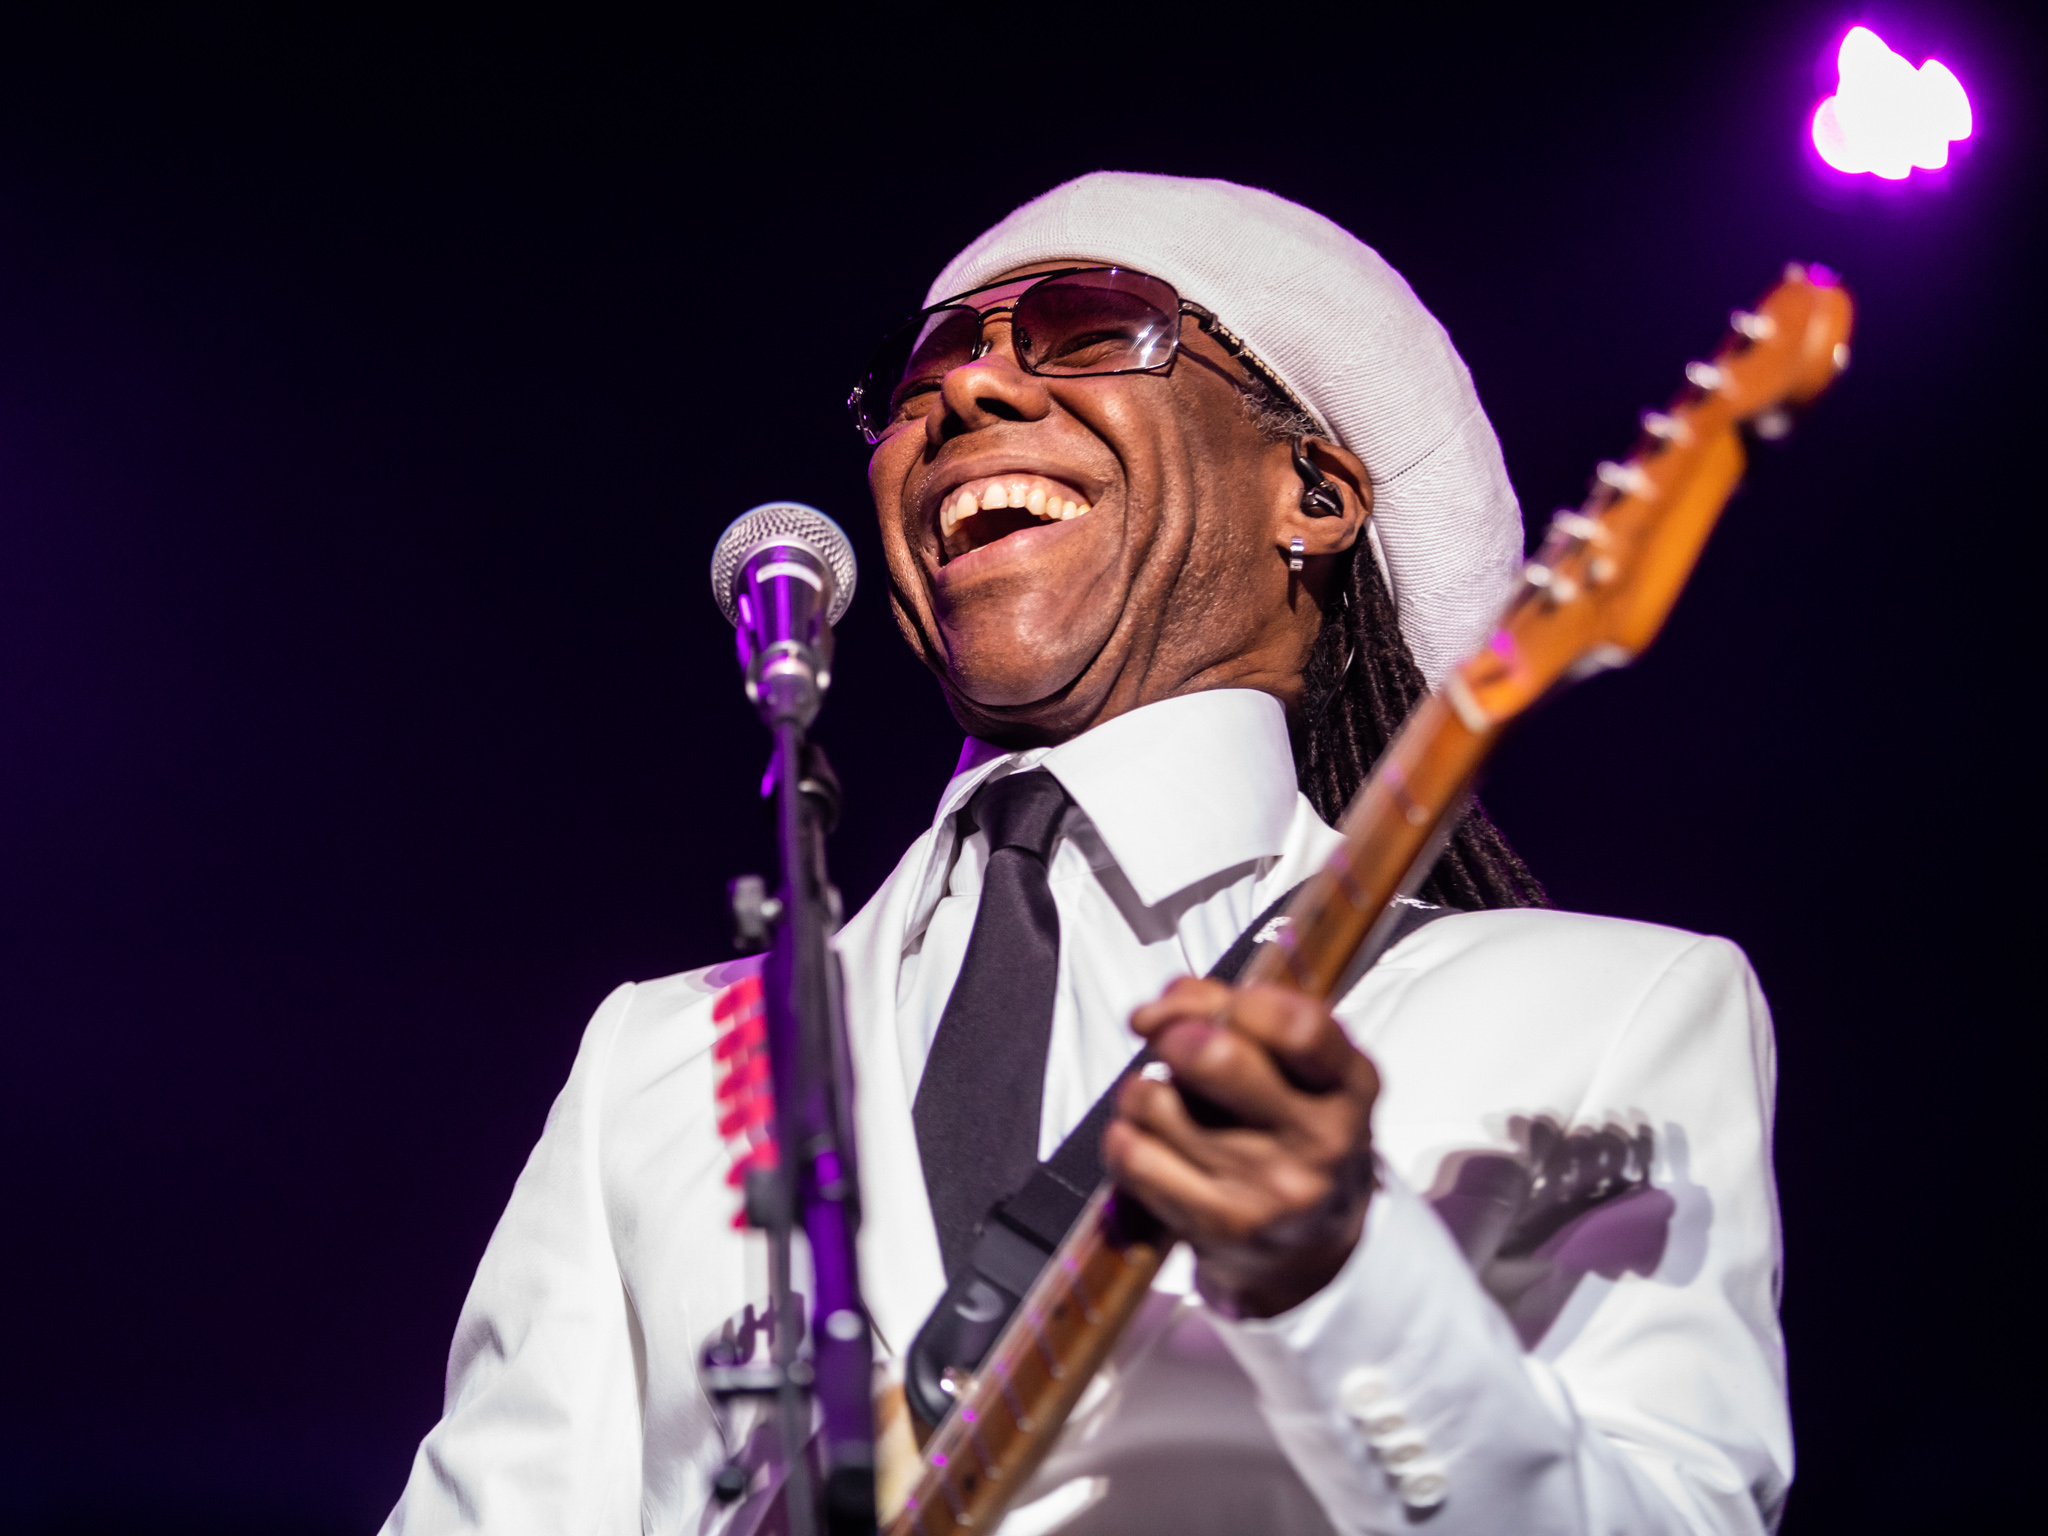 Nile Rogers by Bullet-ray Photography